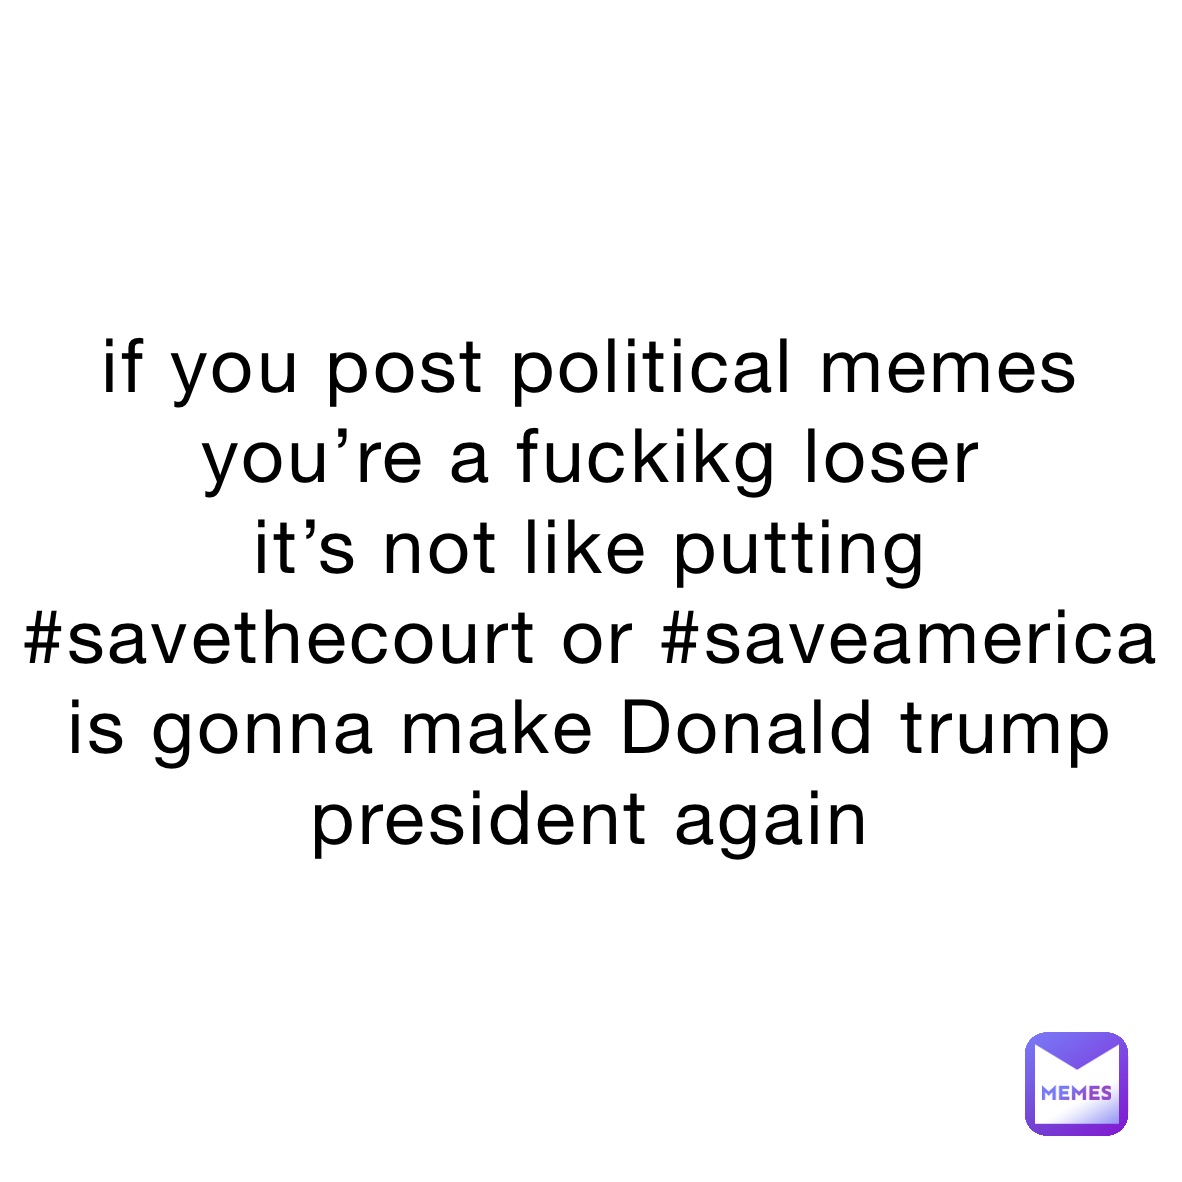 if you post political memes you’re a fuckikg loser 
it’s not like putting #savethecourt or #saveamerica 
is gonna make Donald trump president again 